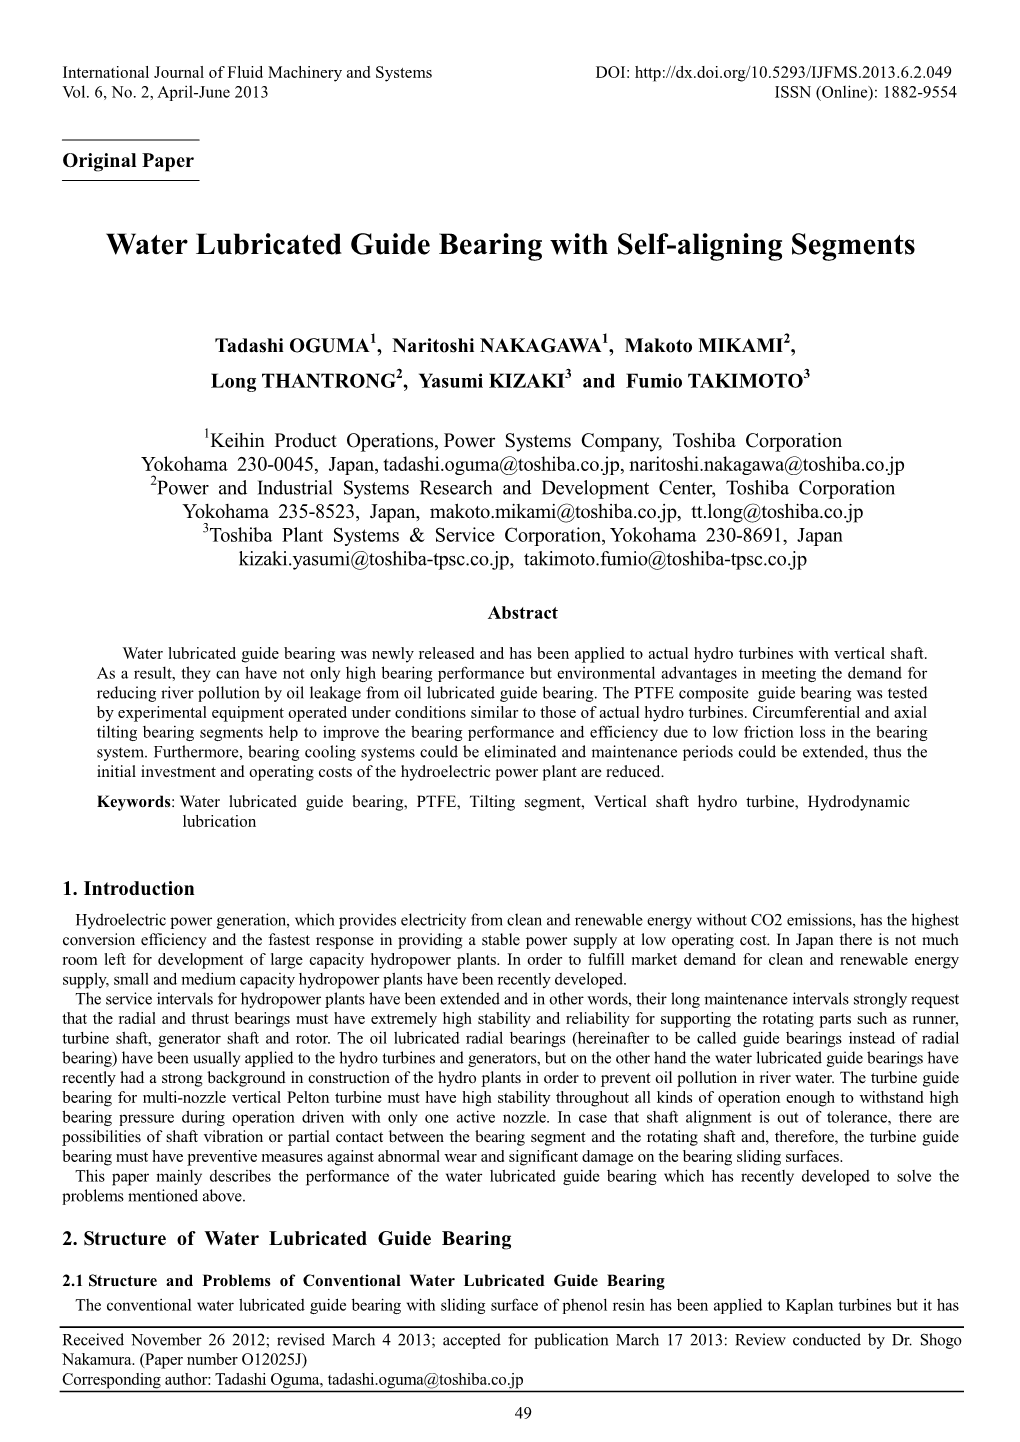 Water Lubricated Guide Bearing with Self-Aligning Segments